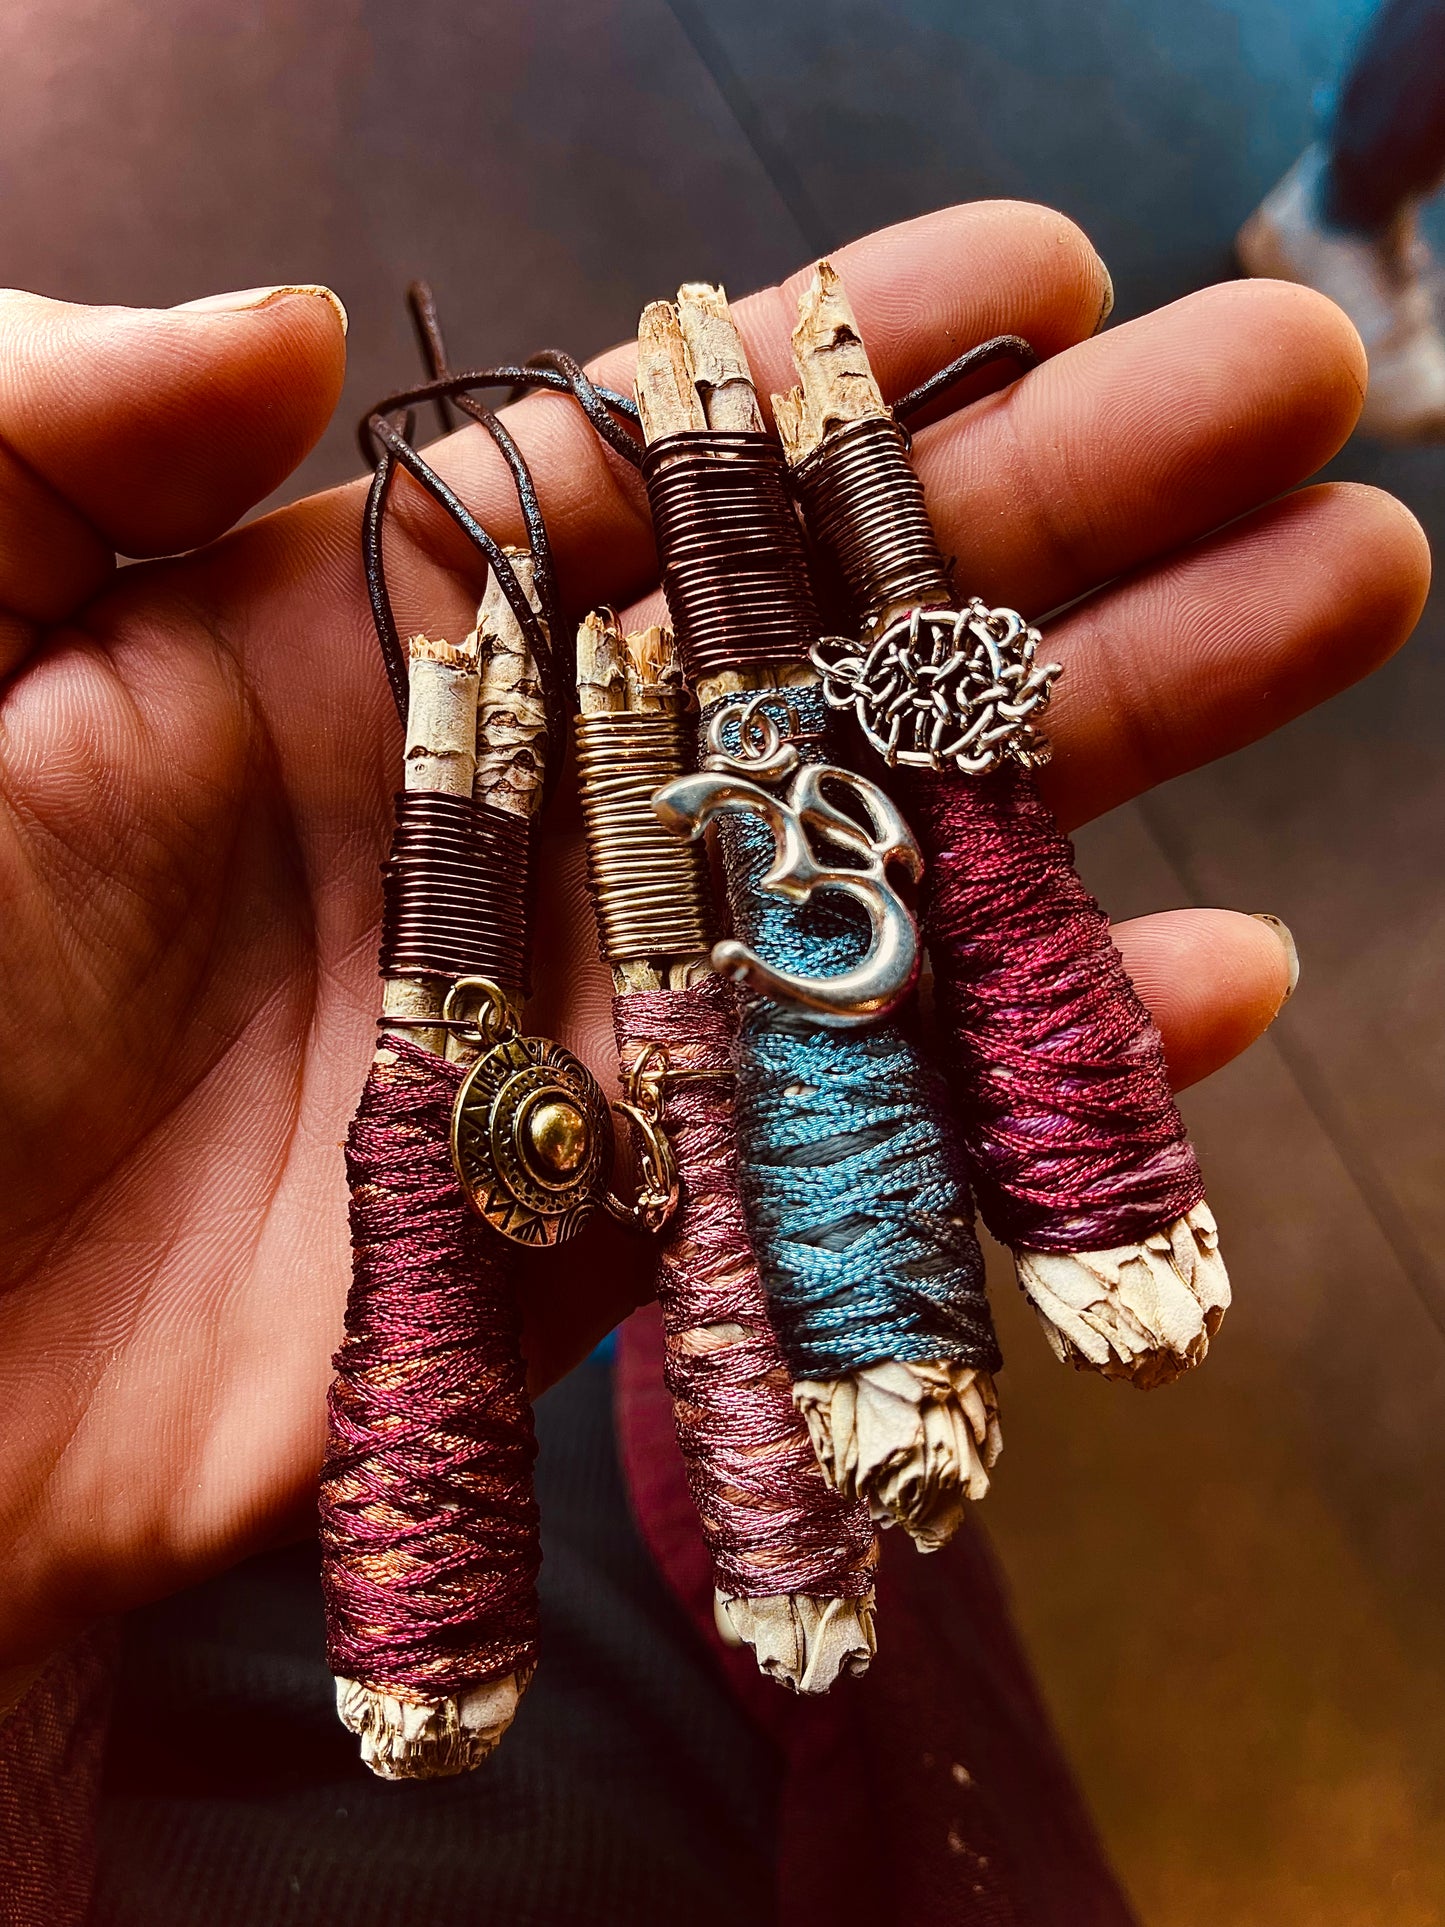 A Handful of sage necklaces with pendants, natural handmade jewelry necklaces of mini sage bundles wrapped in different colors of string, with pendants wire wrapped onto the white sage, beautiful natural necklaces made by Paul Adrian Moon